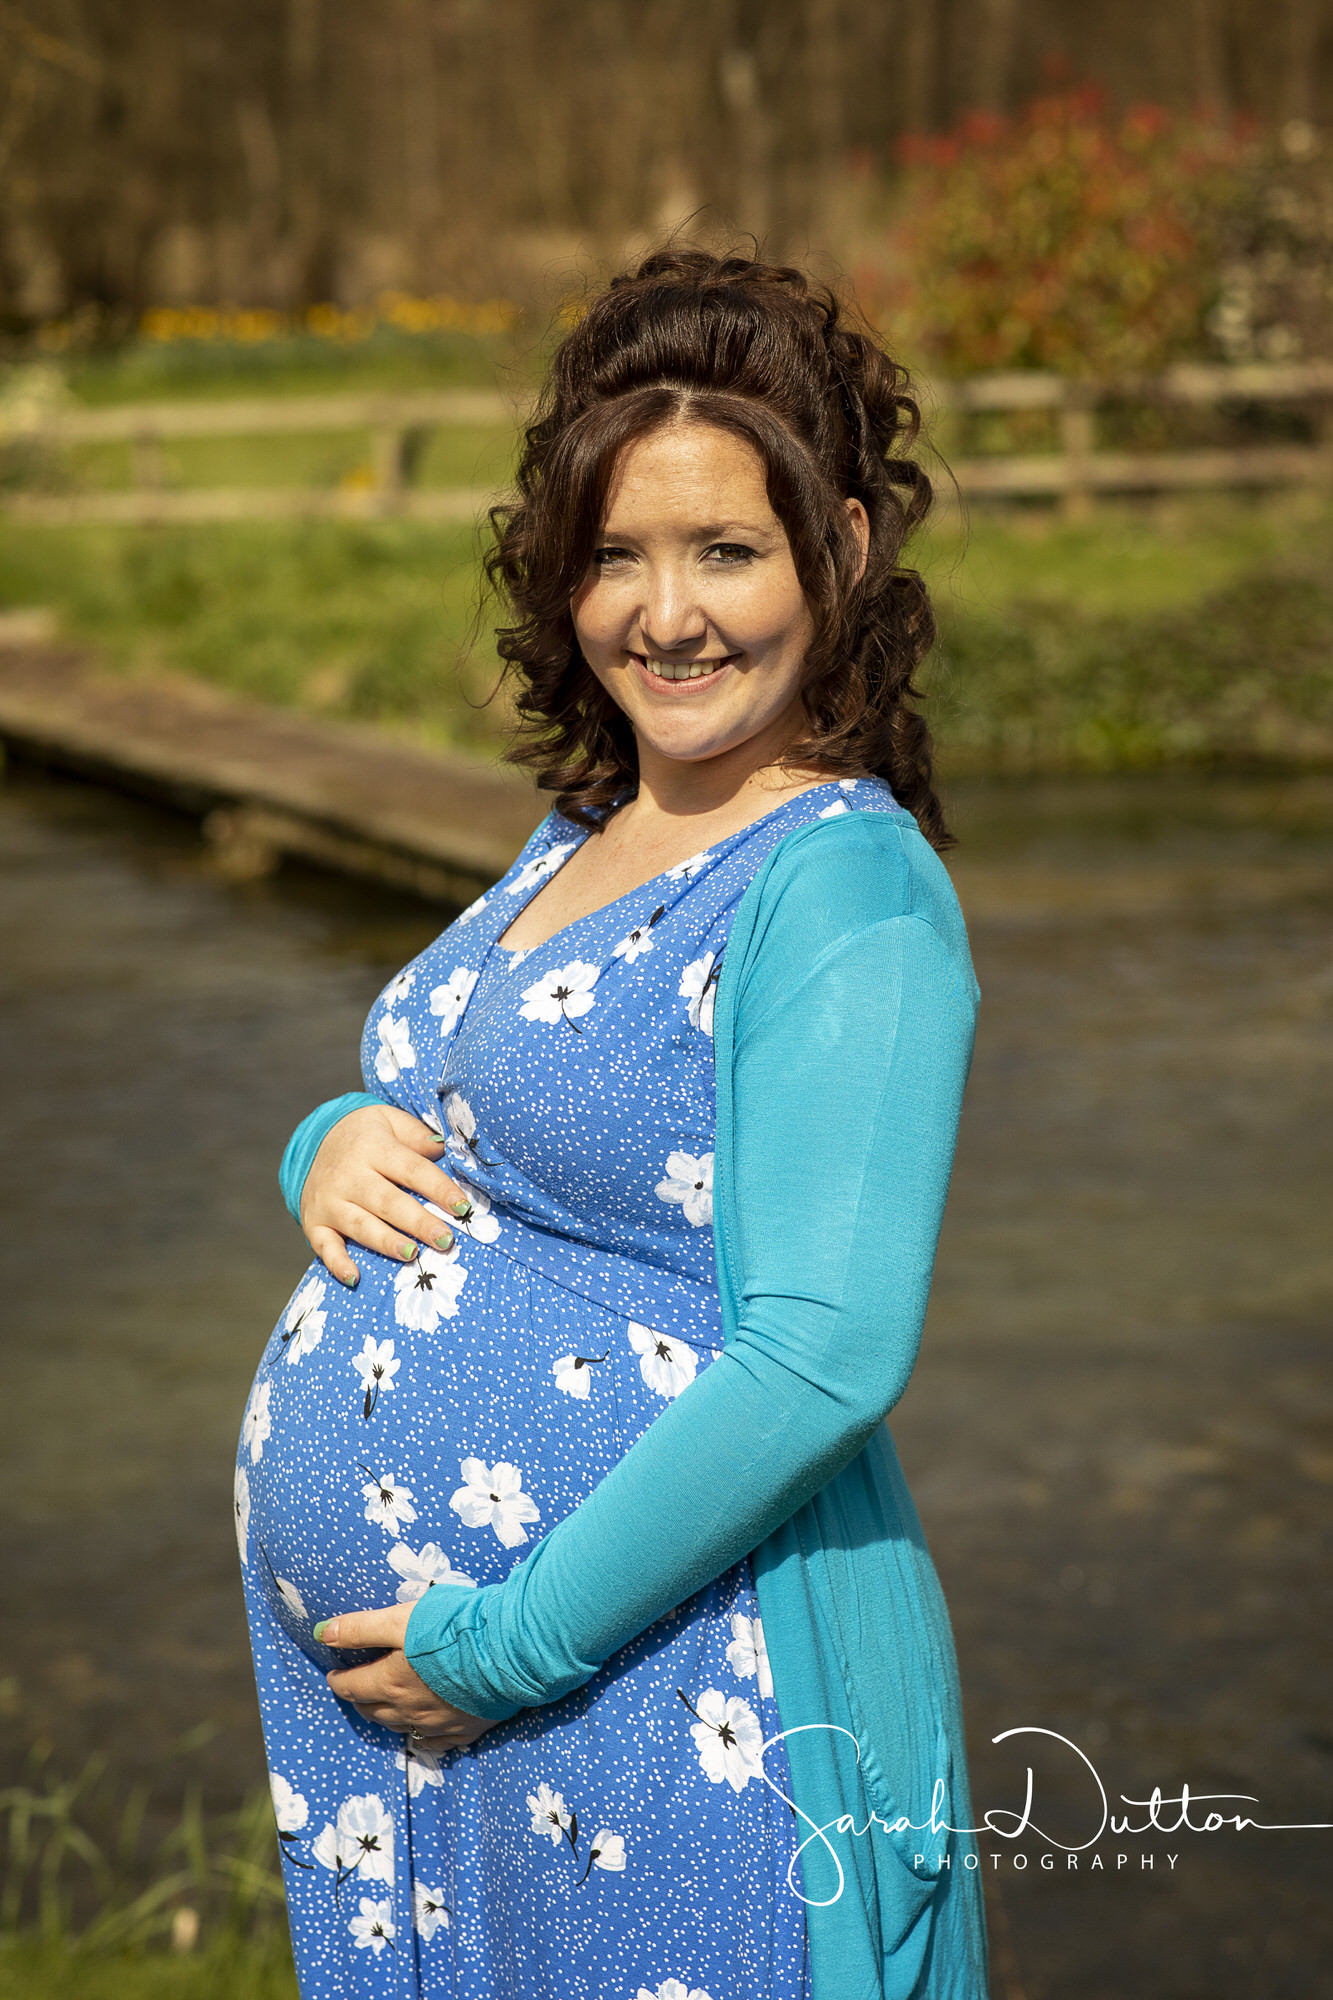 Maternity baby bump photography portrait taken outdoor in Whitchurch Hampshire